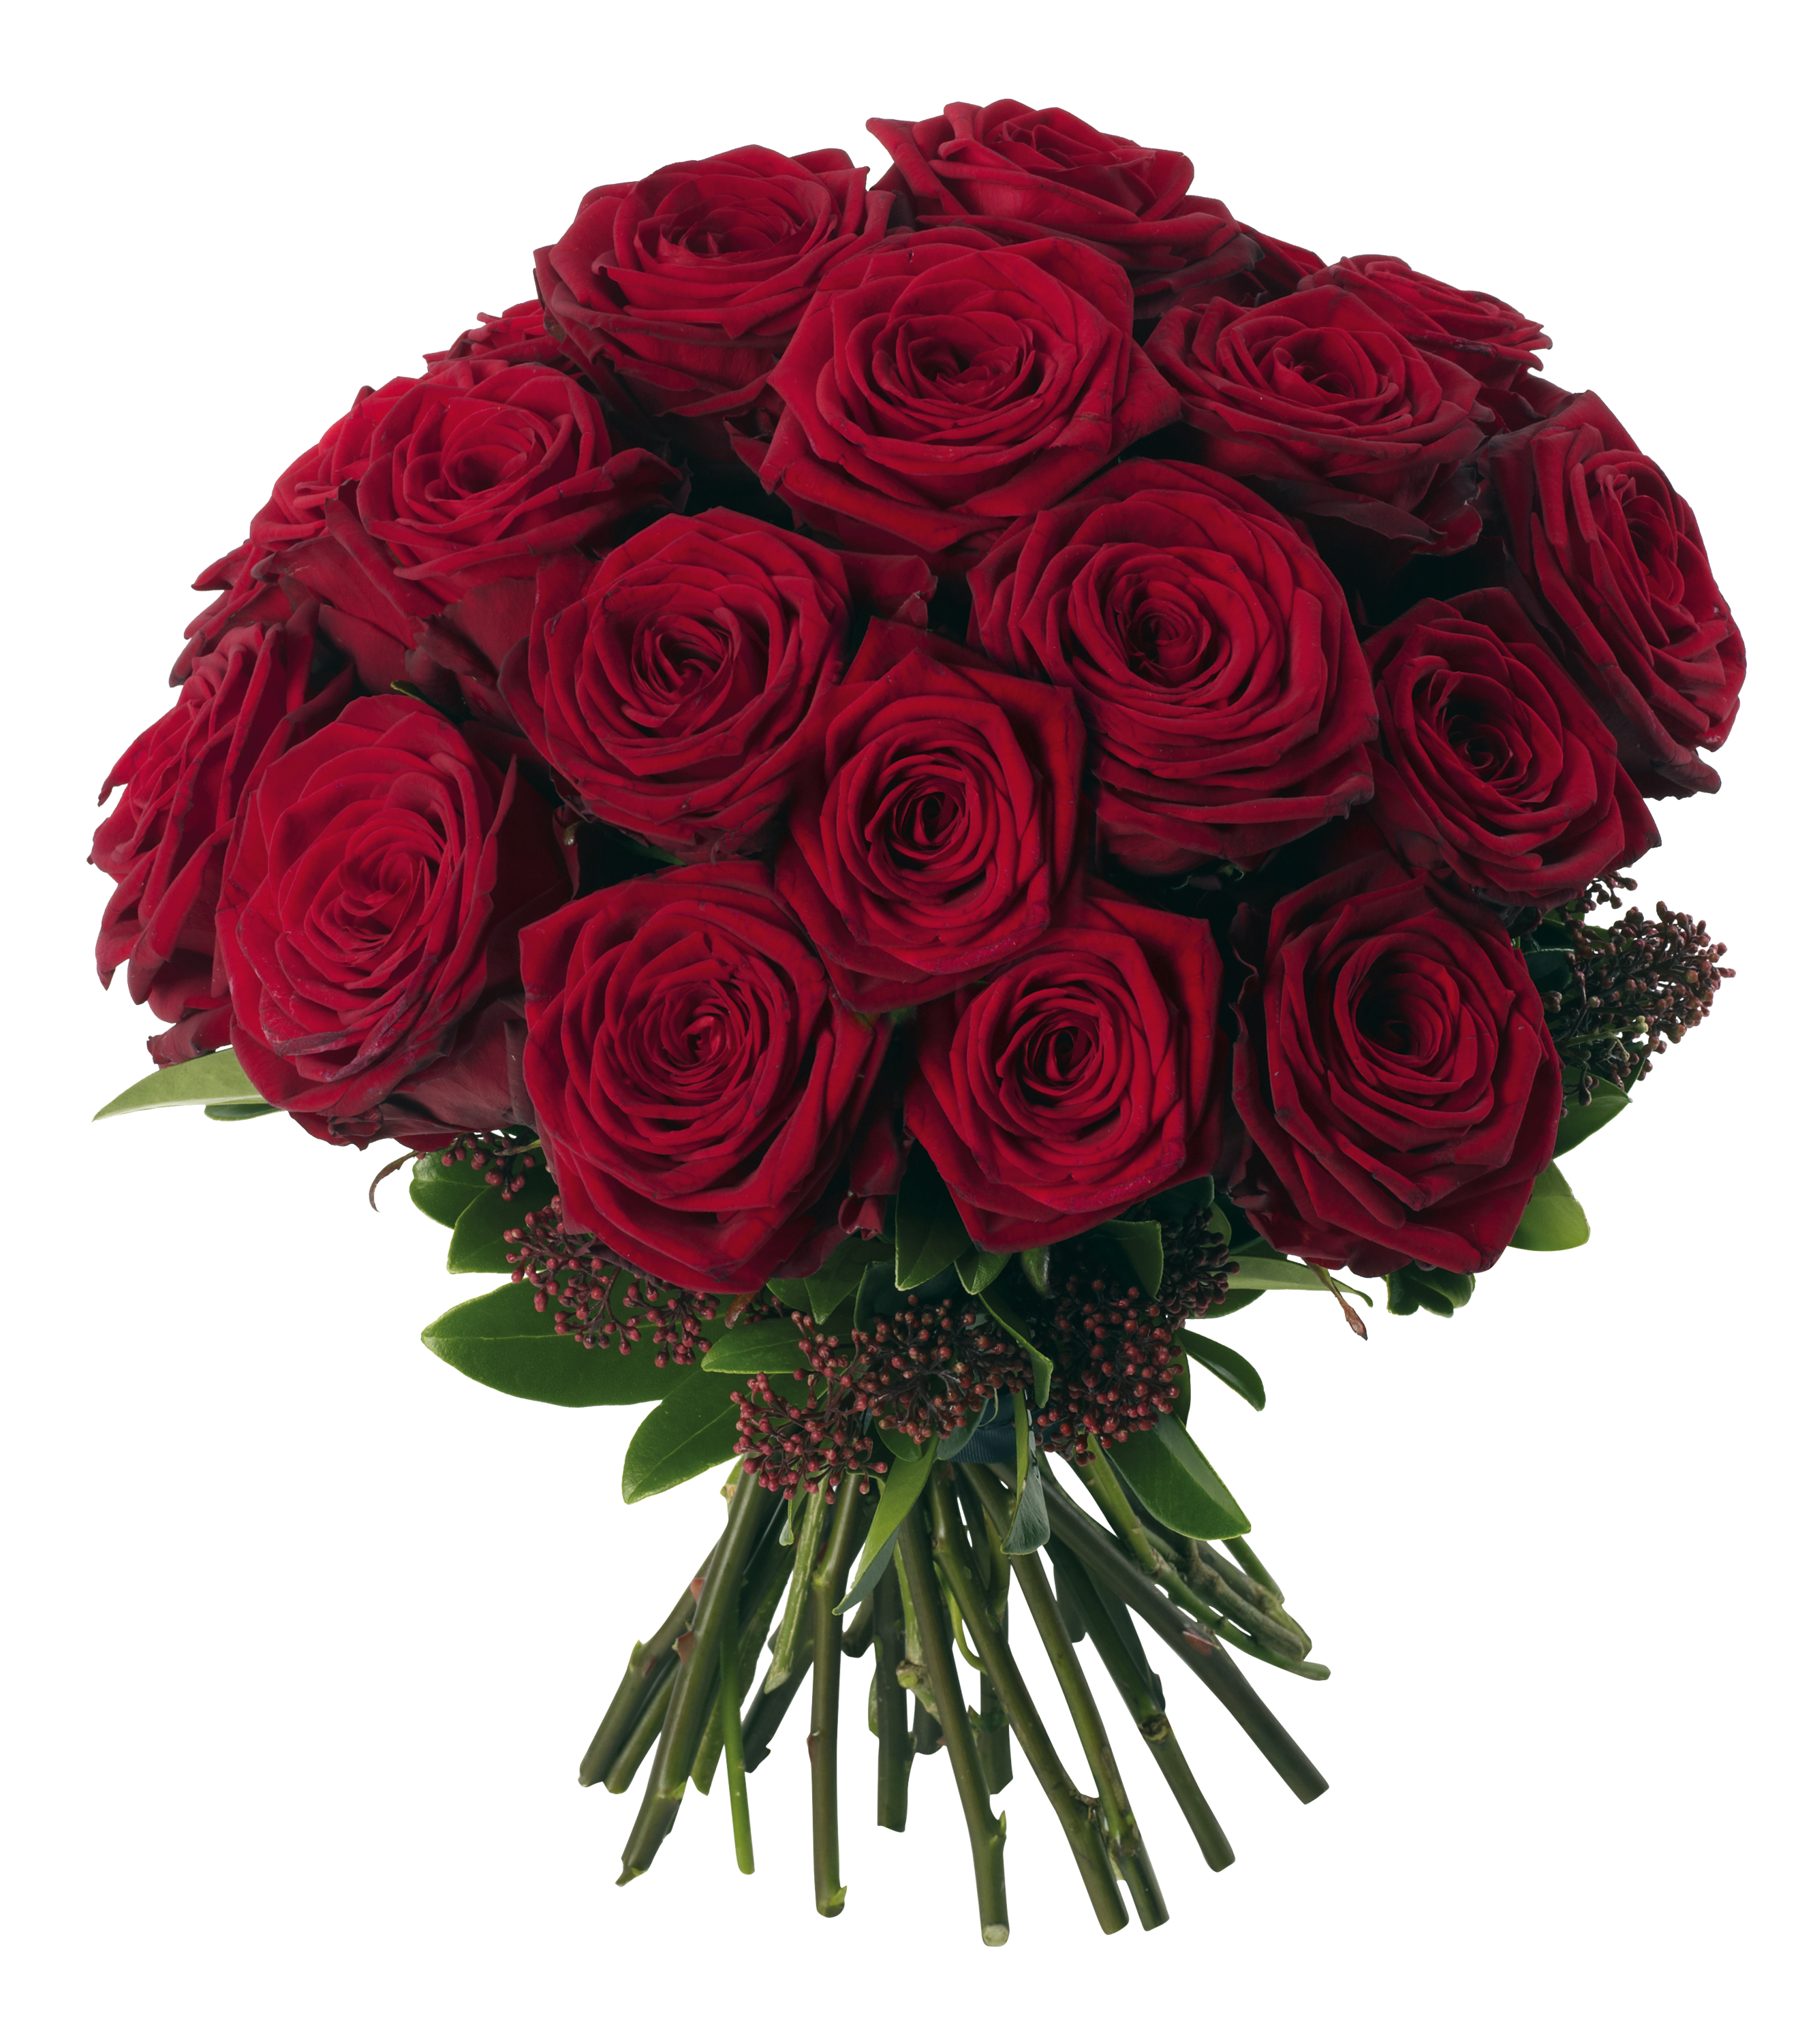 Transparent Red Roses Bouquet PNG Clipart Picture.